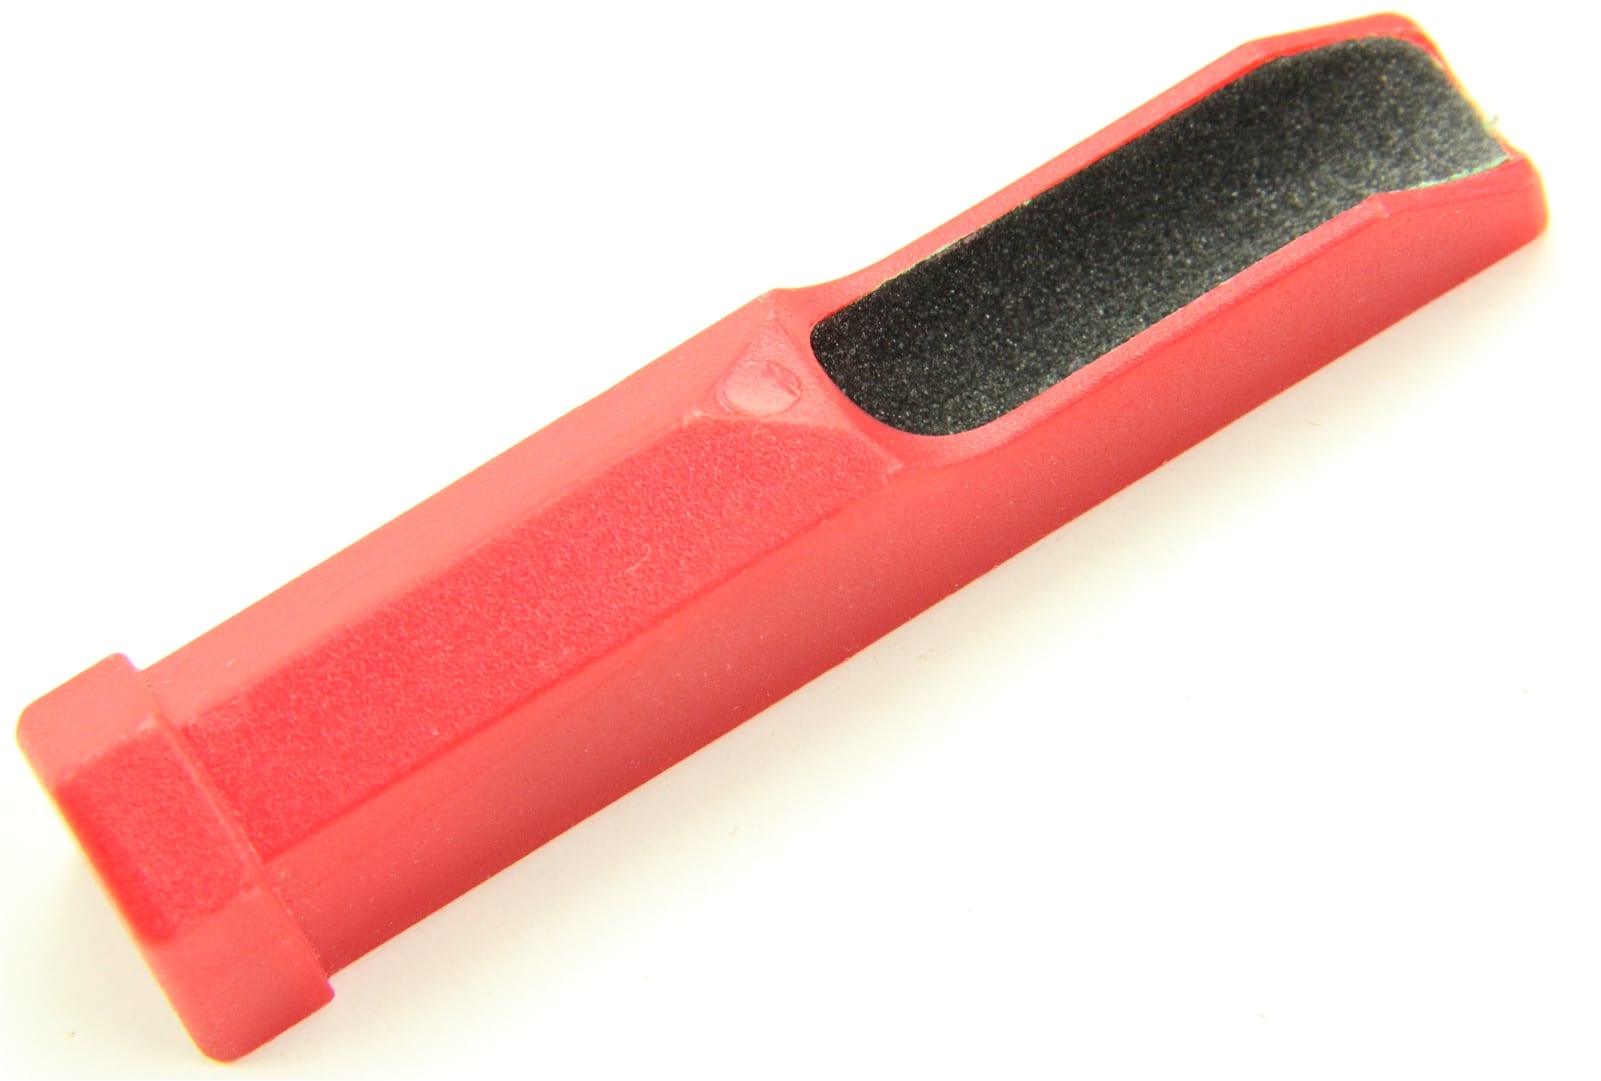 Pocket-Sized SUPAFILE Cue Tip Shaper: Red Plastic & Dual Sandpapered